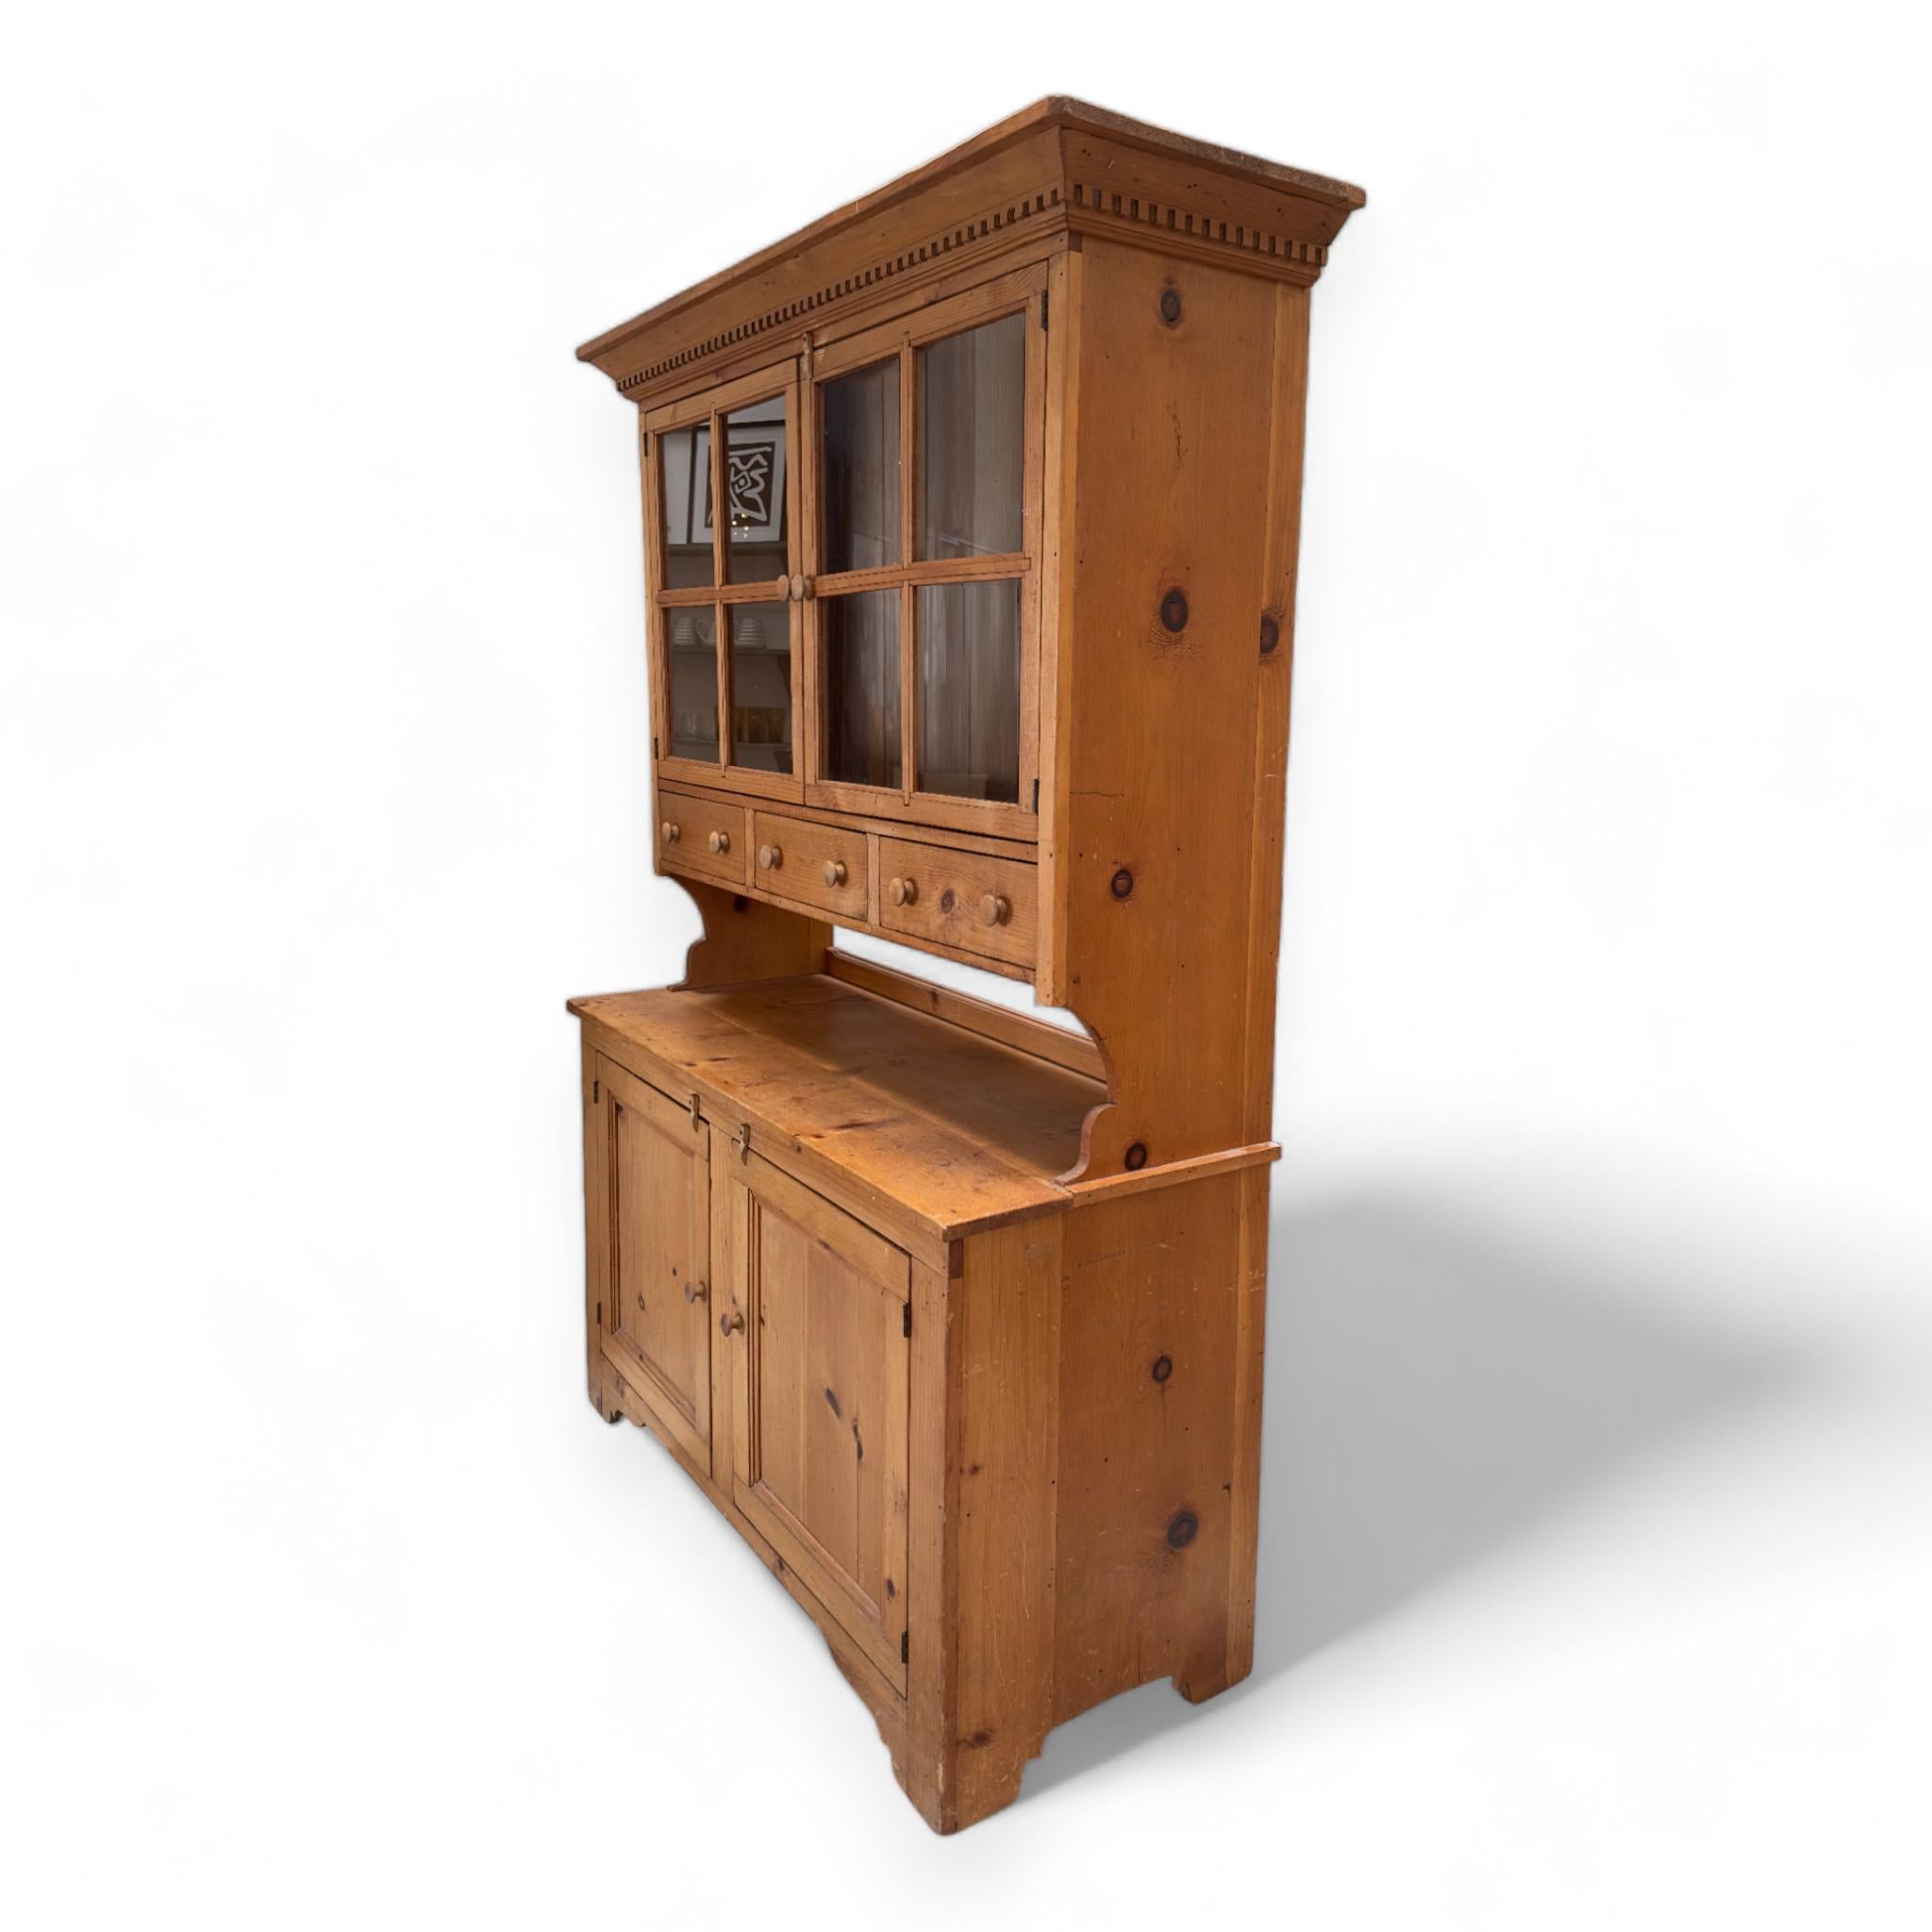 Vintage Knotted Pine Kitchen Cupboard In Good Condition For Sale In Los Angeles, CA